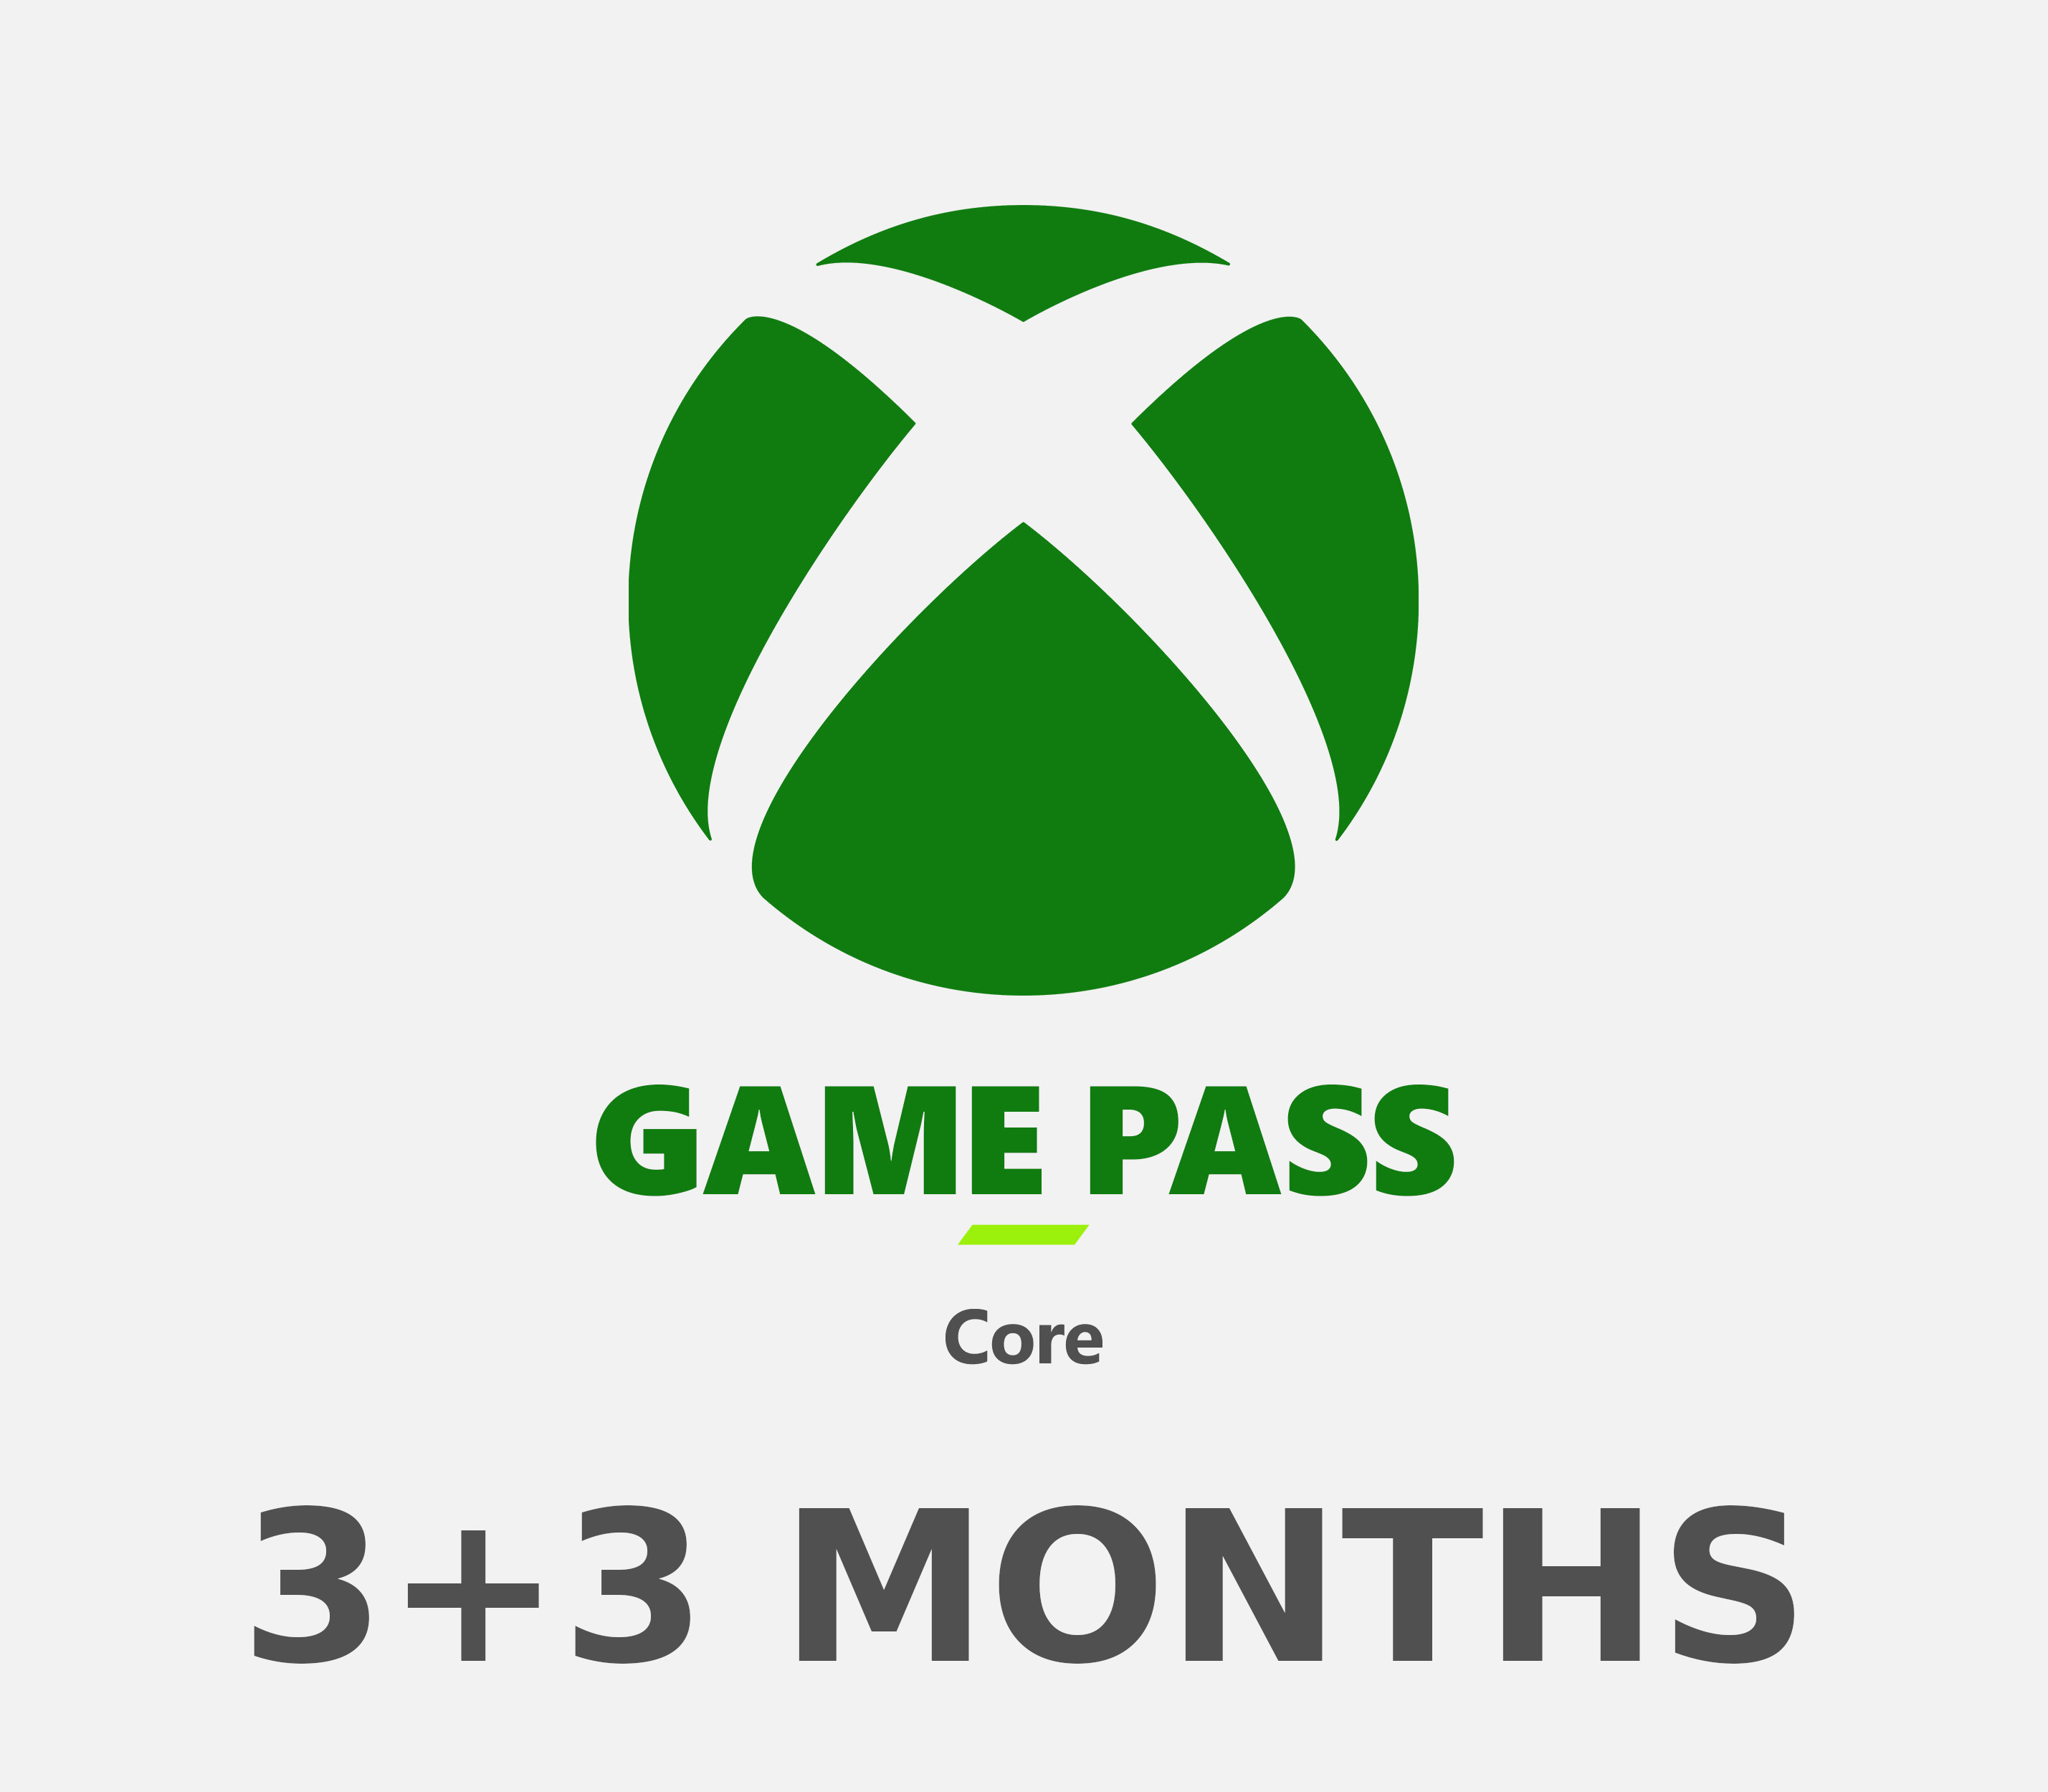 XBOX Game Pass Core 3 + 3 (6) Months Subscription Card